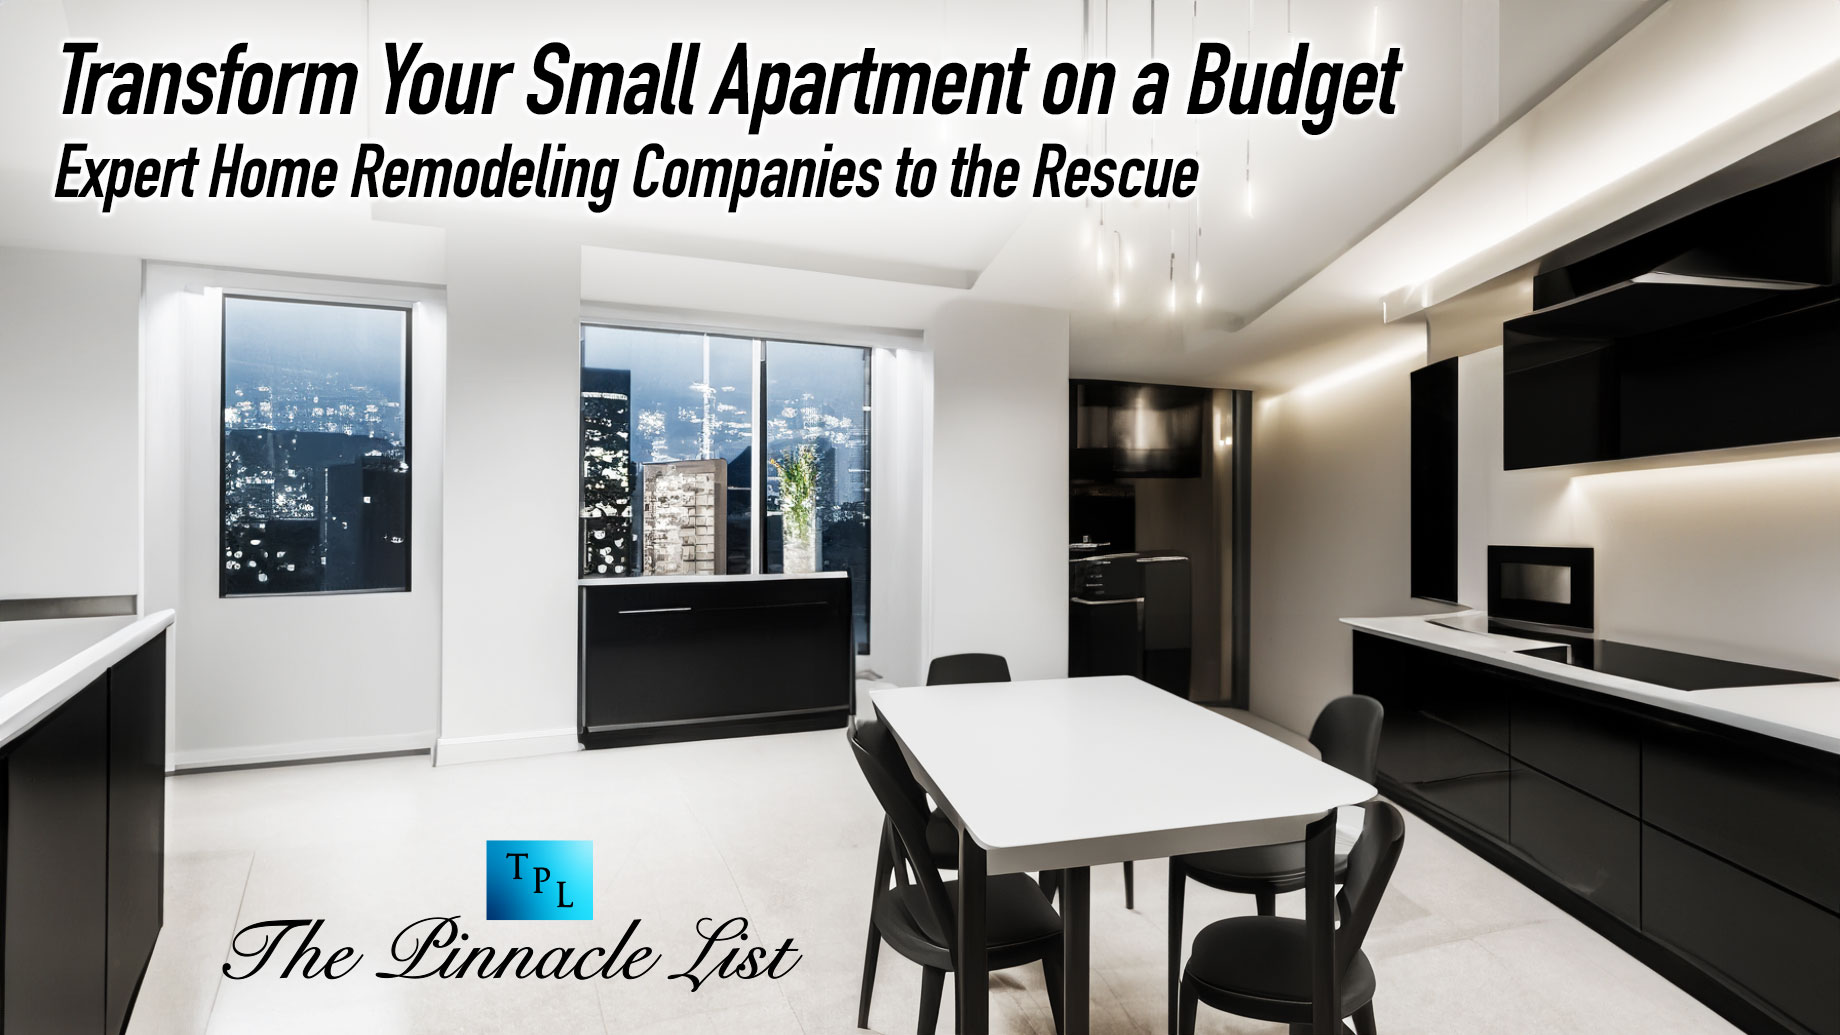 Transform Your Small Apartment on a Budget - Expert Home Remodeling Companies to the Rescue